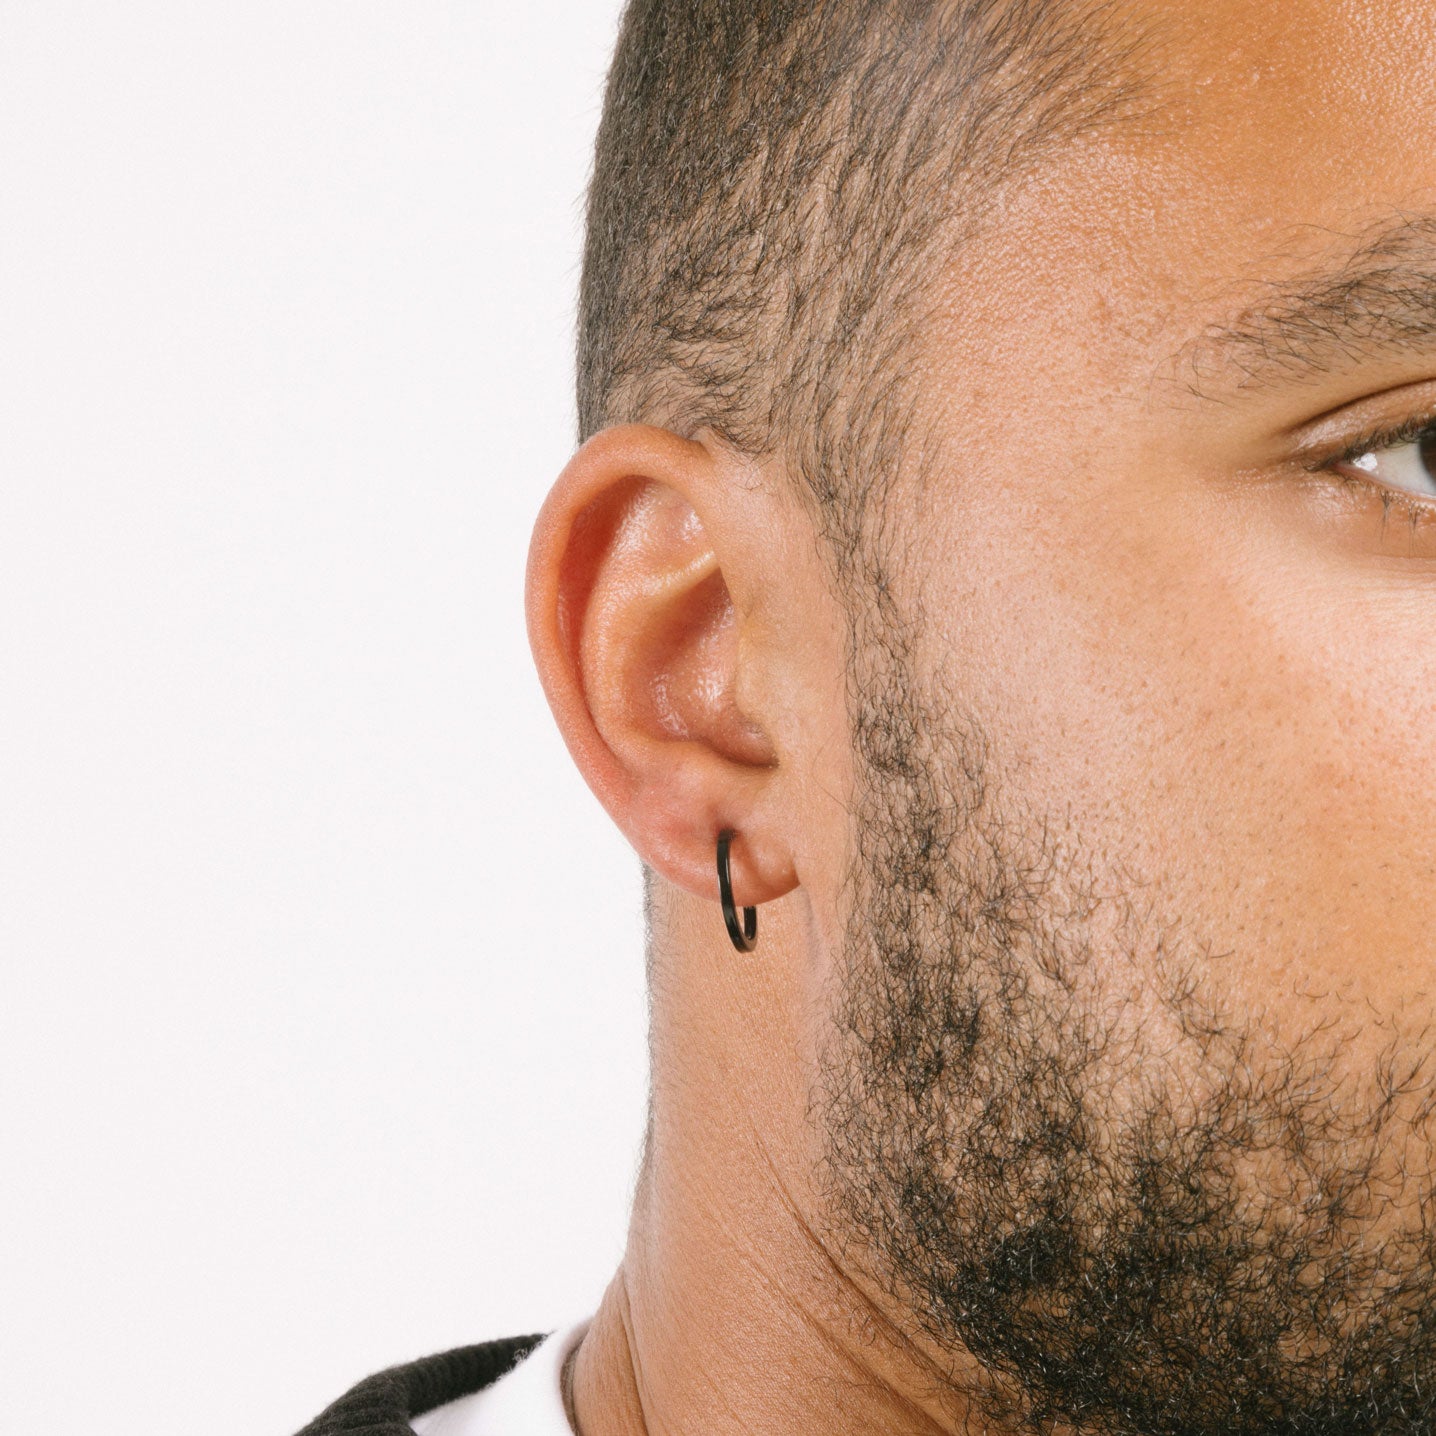 Aggregate more than 183 mens wearing earrings latest